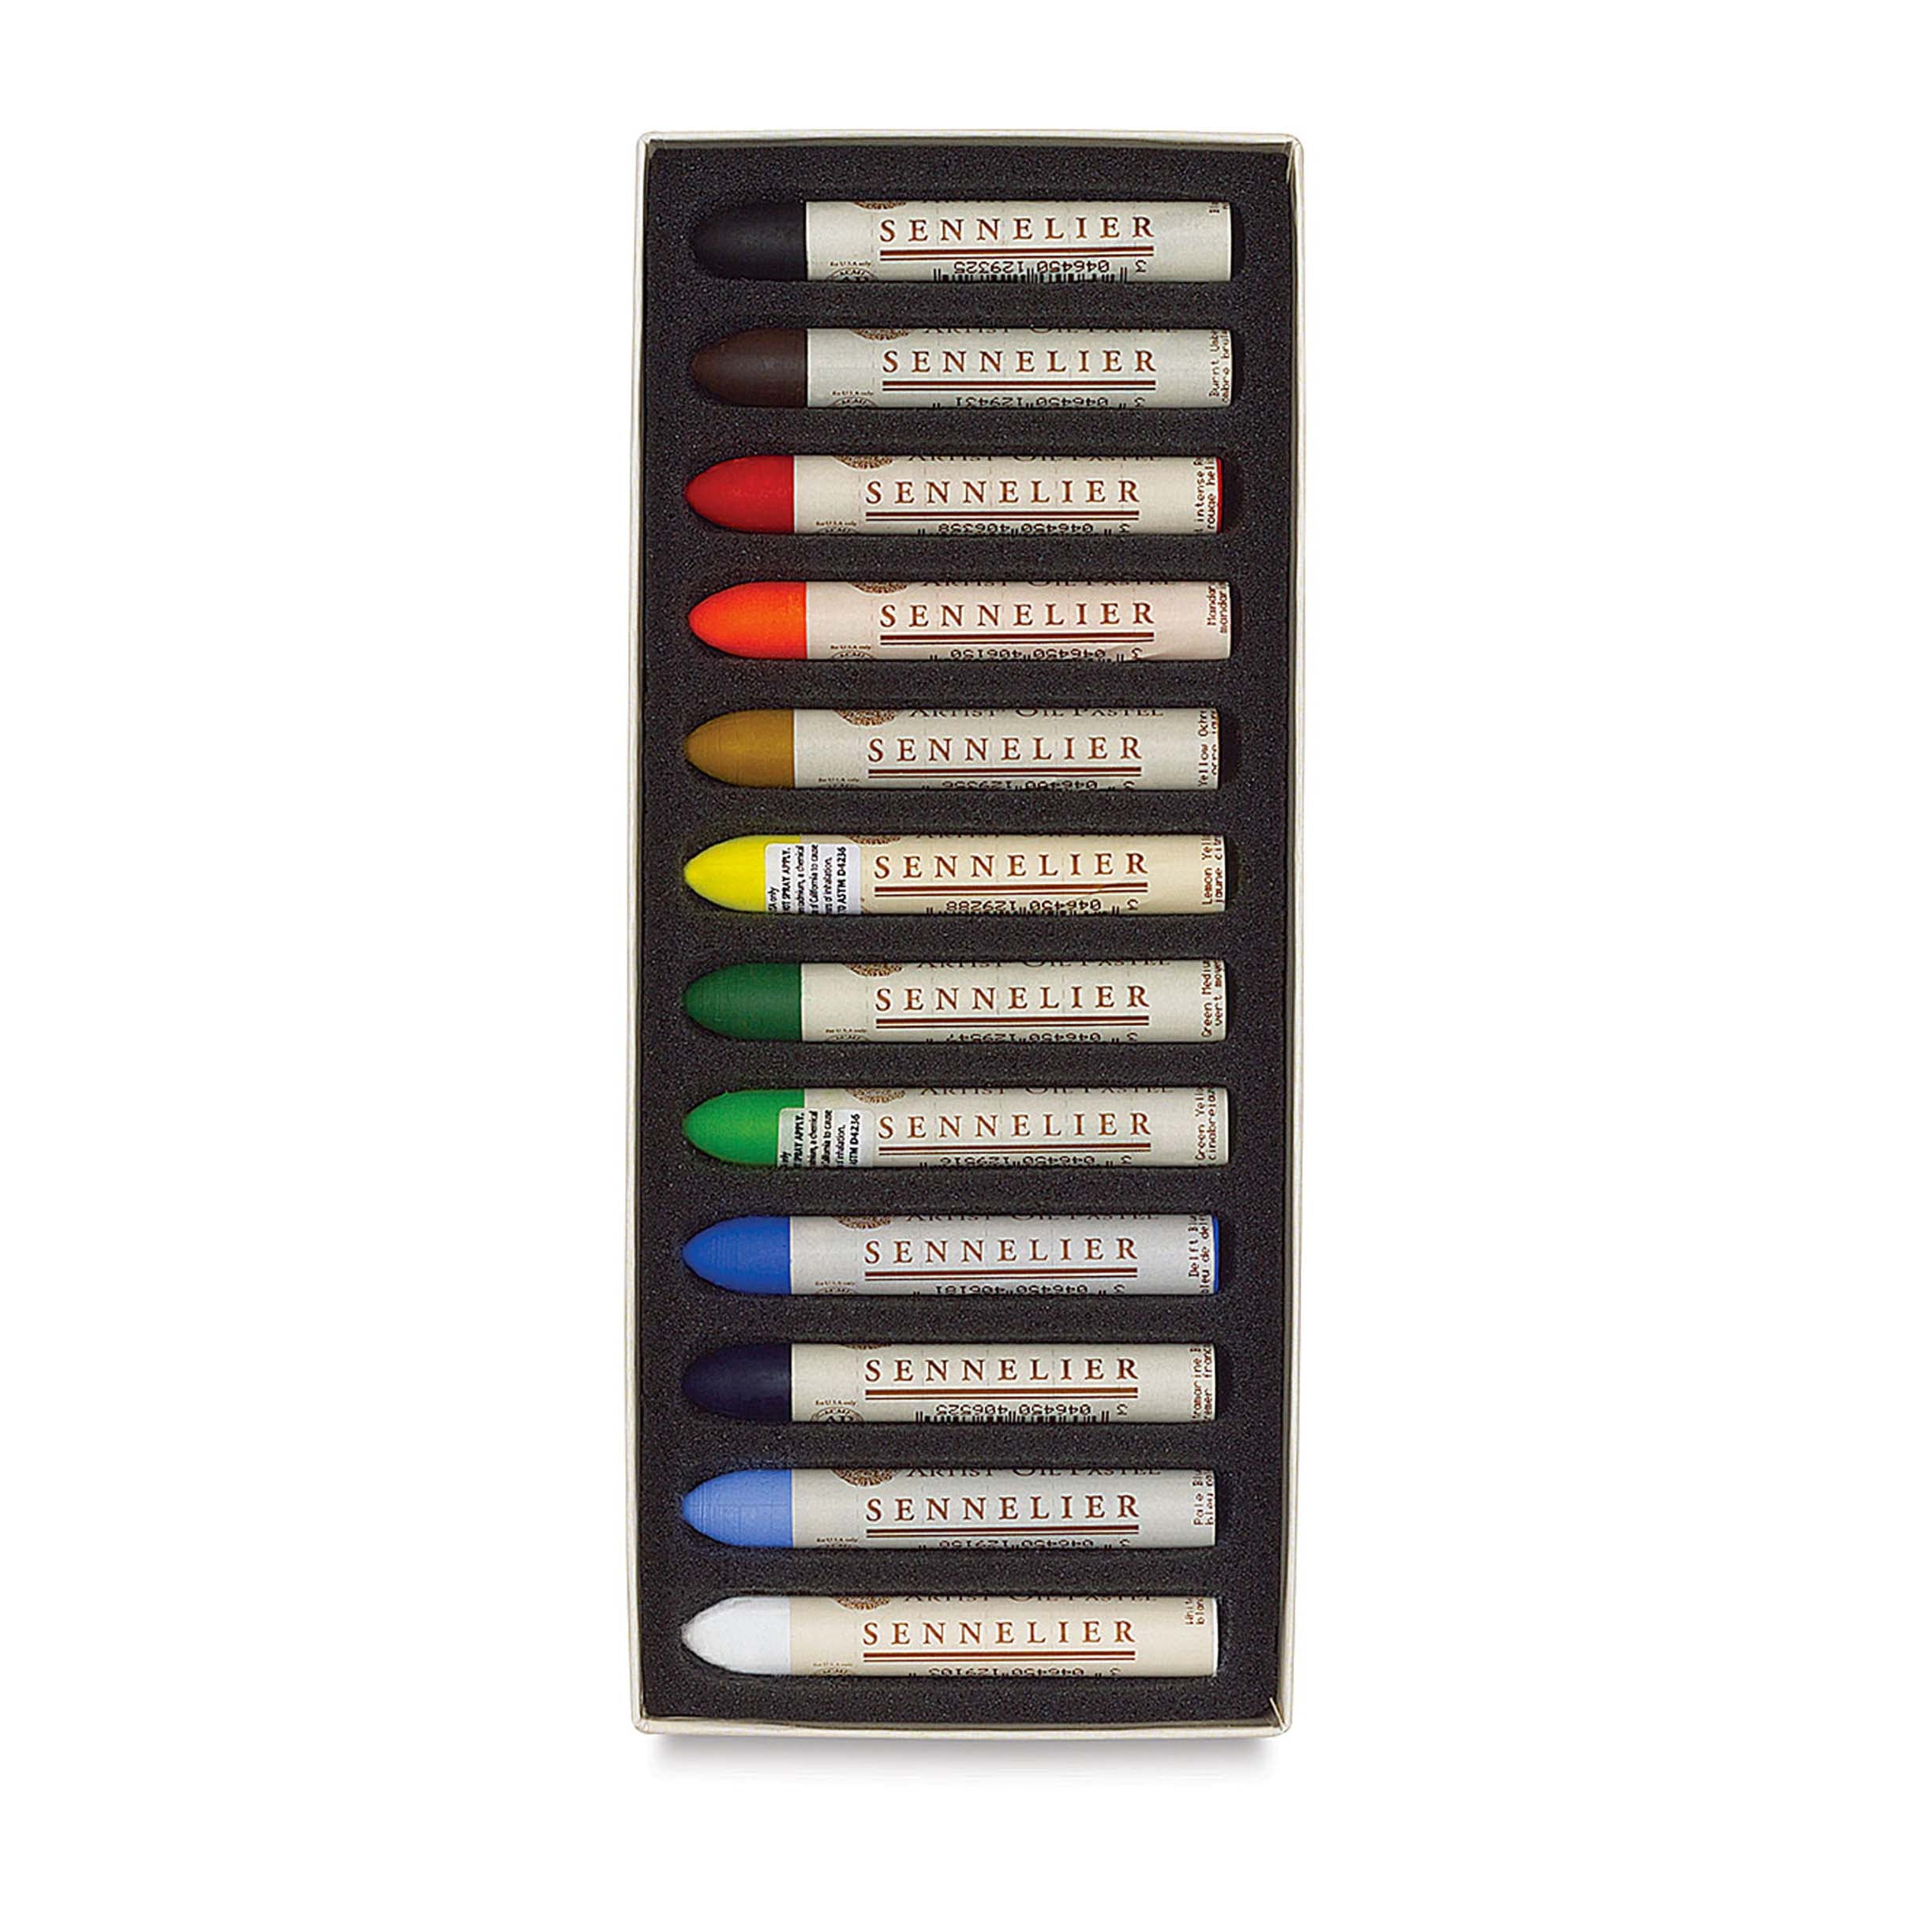 Sennelier Oil Pastels, Introductory Set of 12